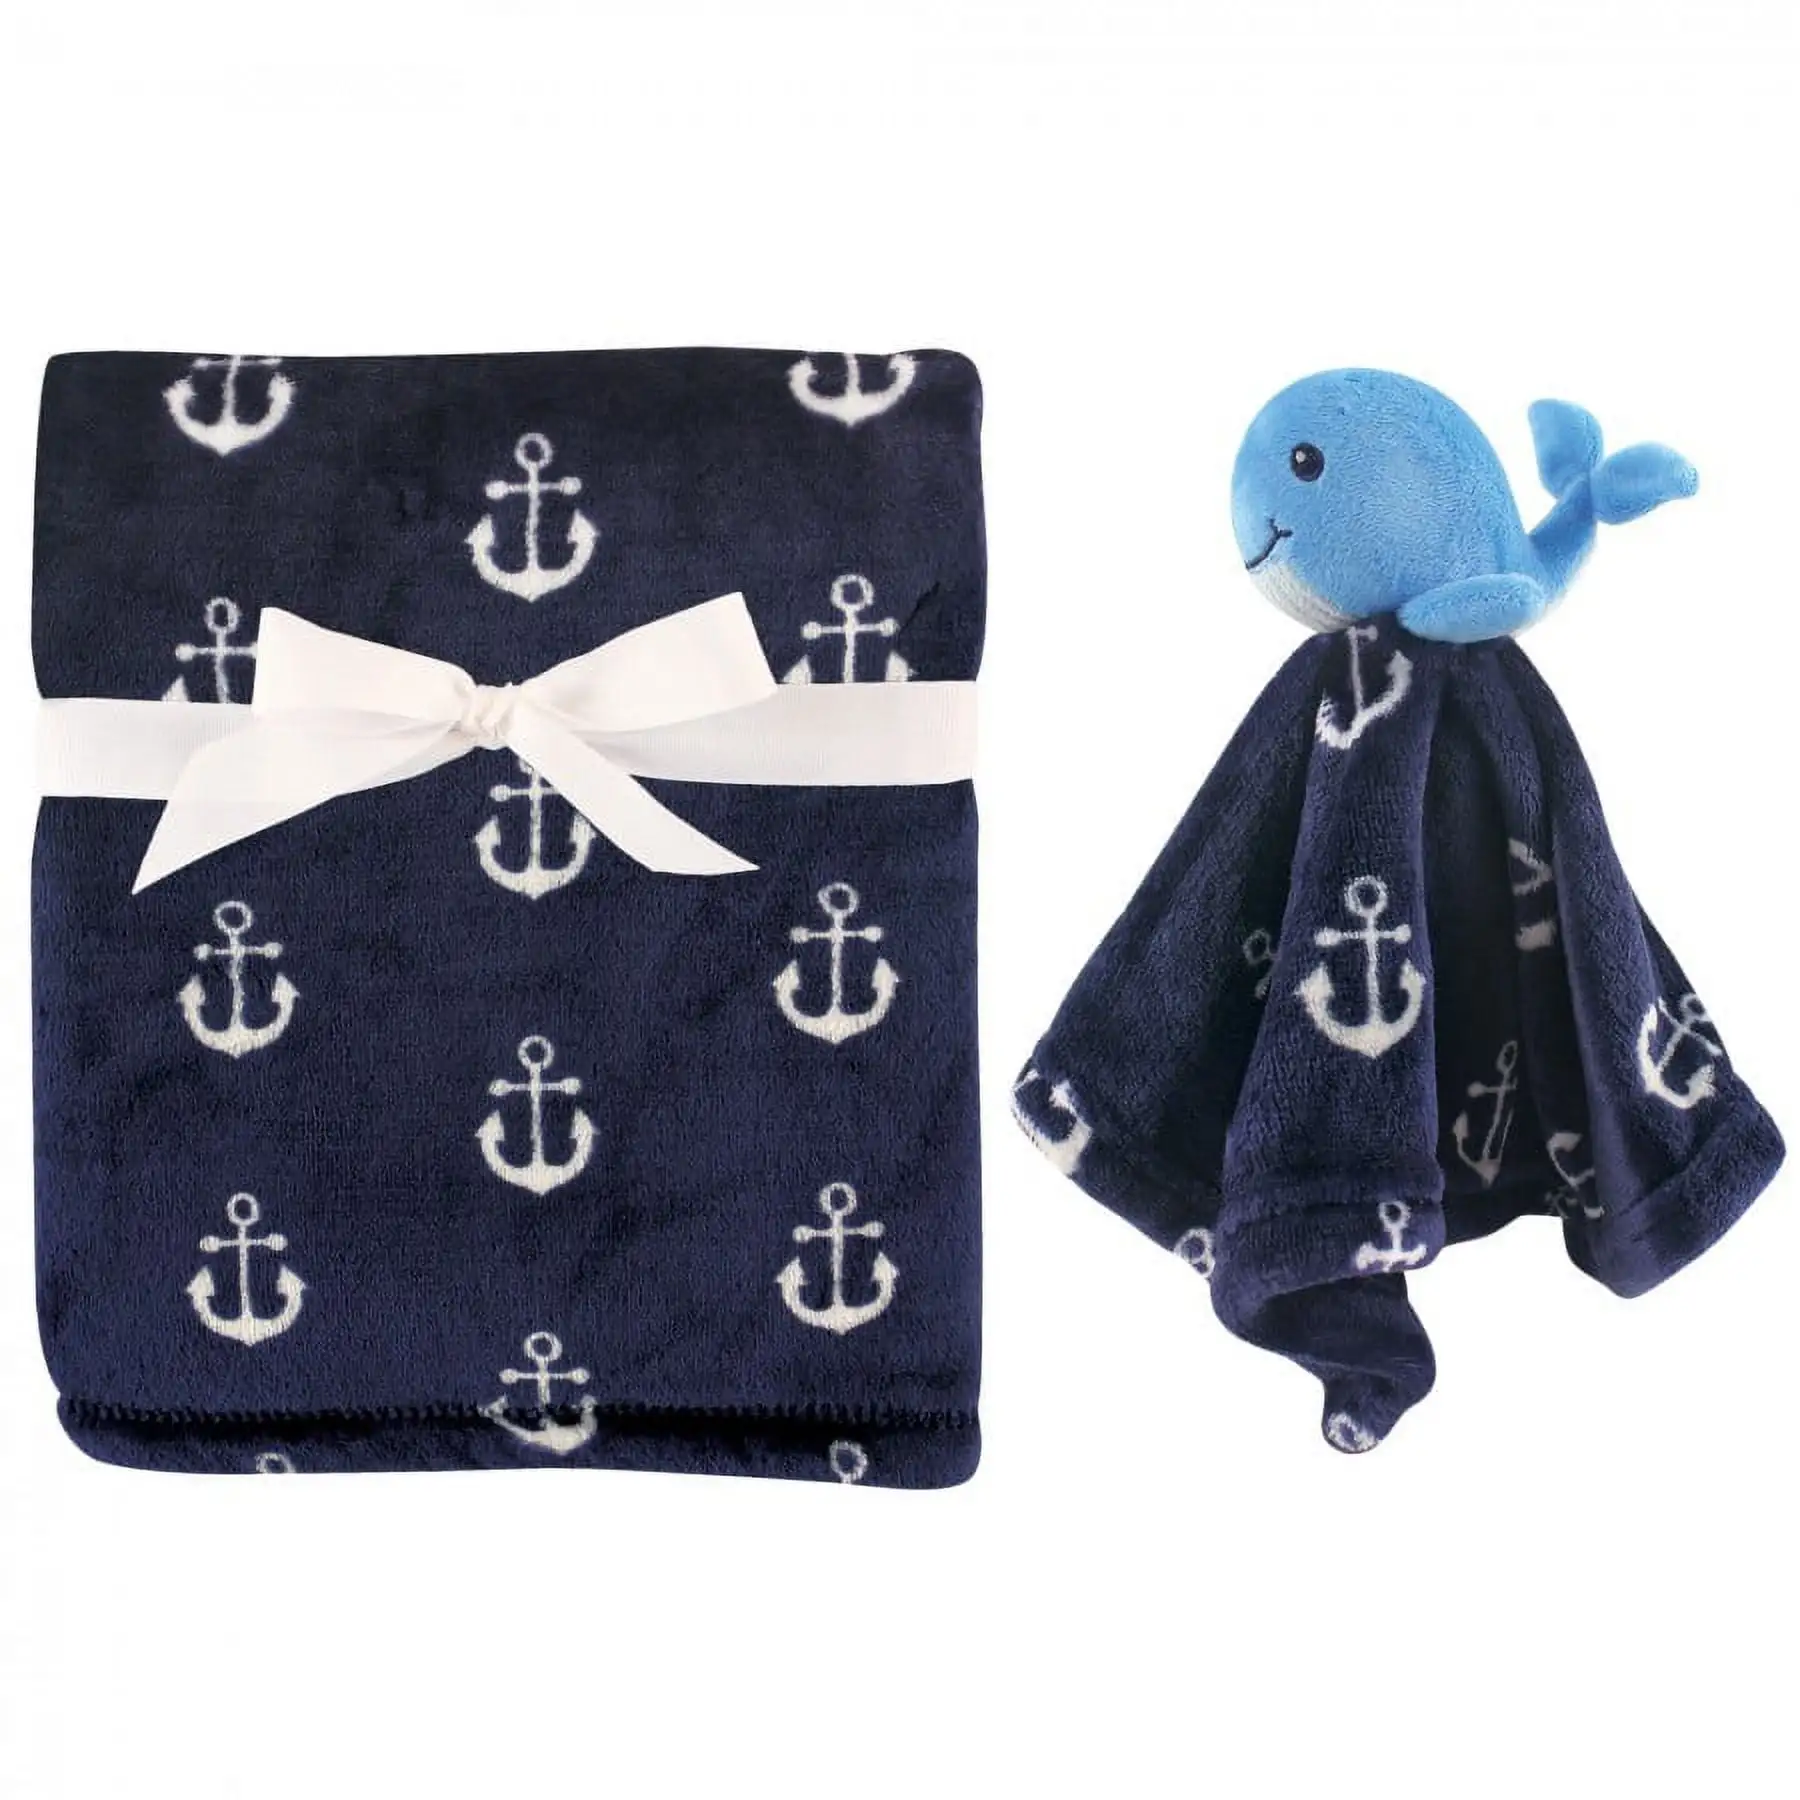 Hudson Baby Infant Boy Plush Blanket with Security Blanket. Whale. One Size